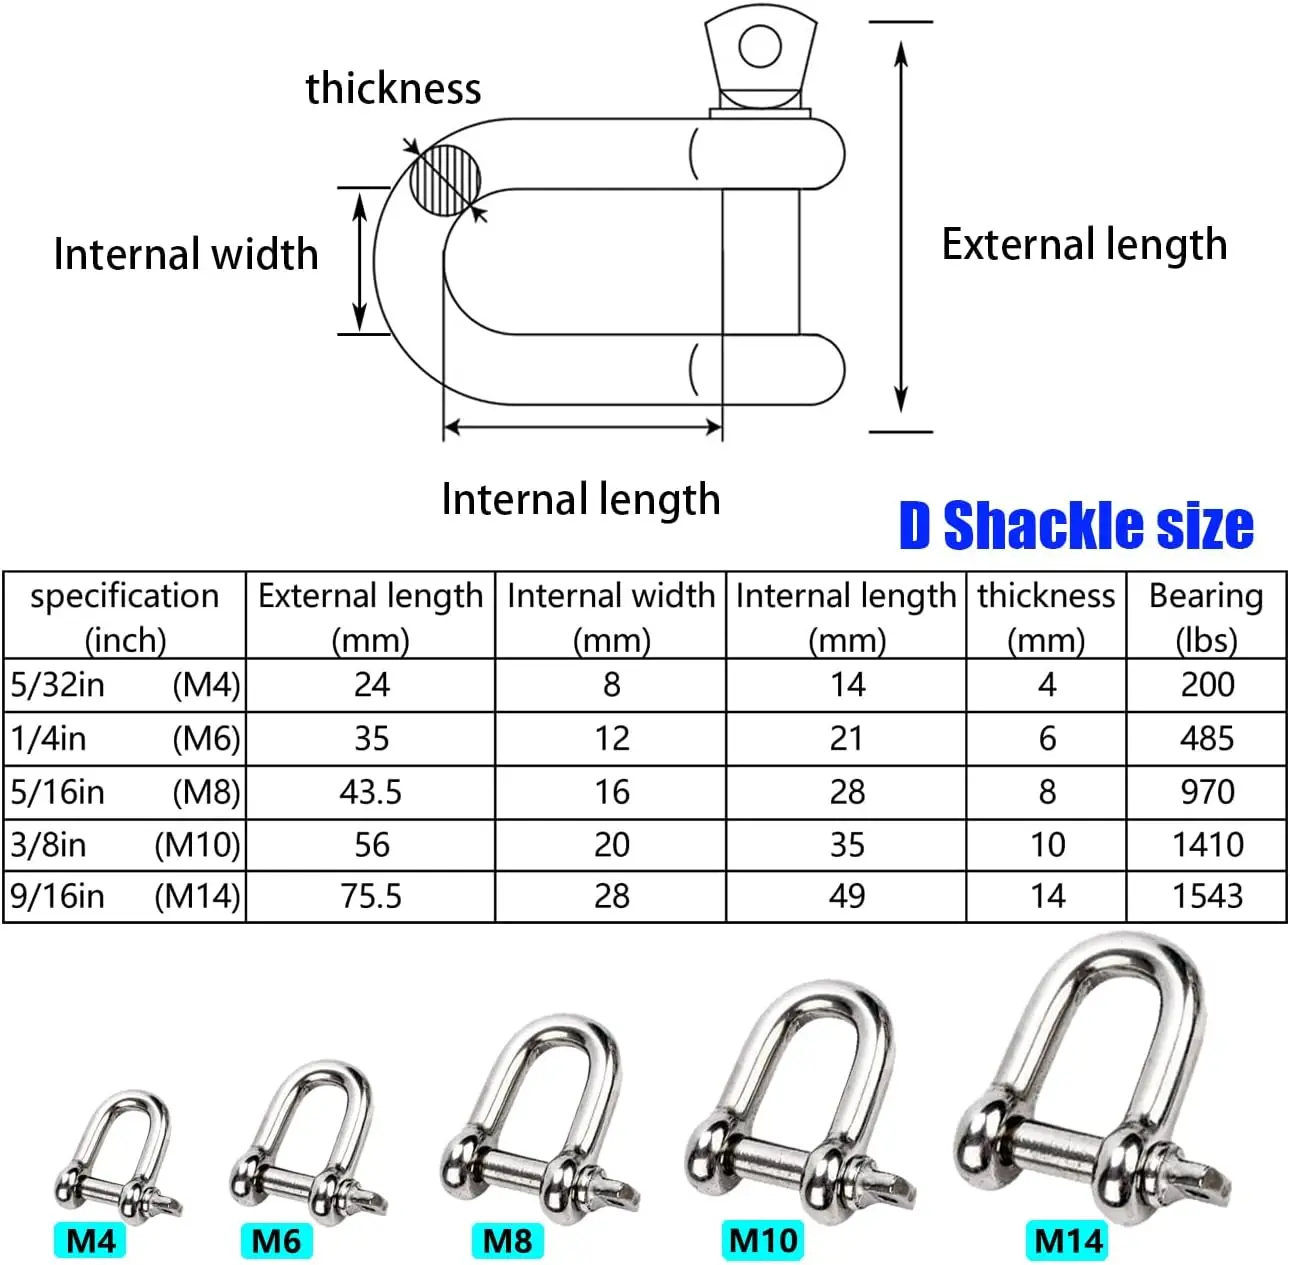 M6 D Type Shackle Short Paragraph Rigging 304 Stainless Steel 1/4 inch Shackle Hooks boat rigging hardware Pack of 10